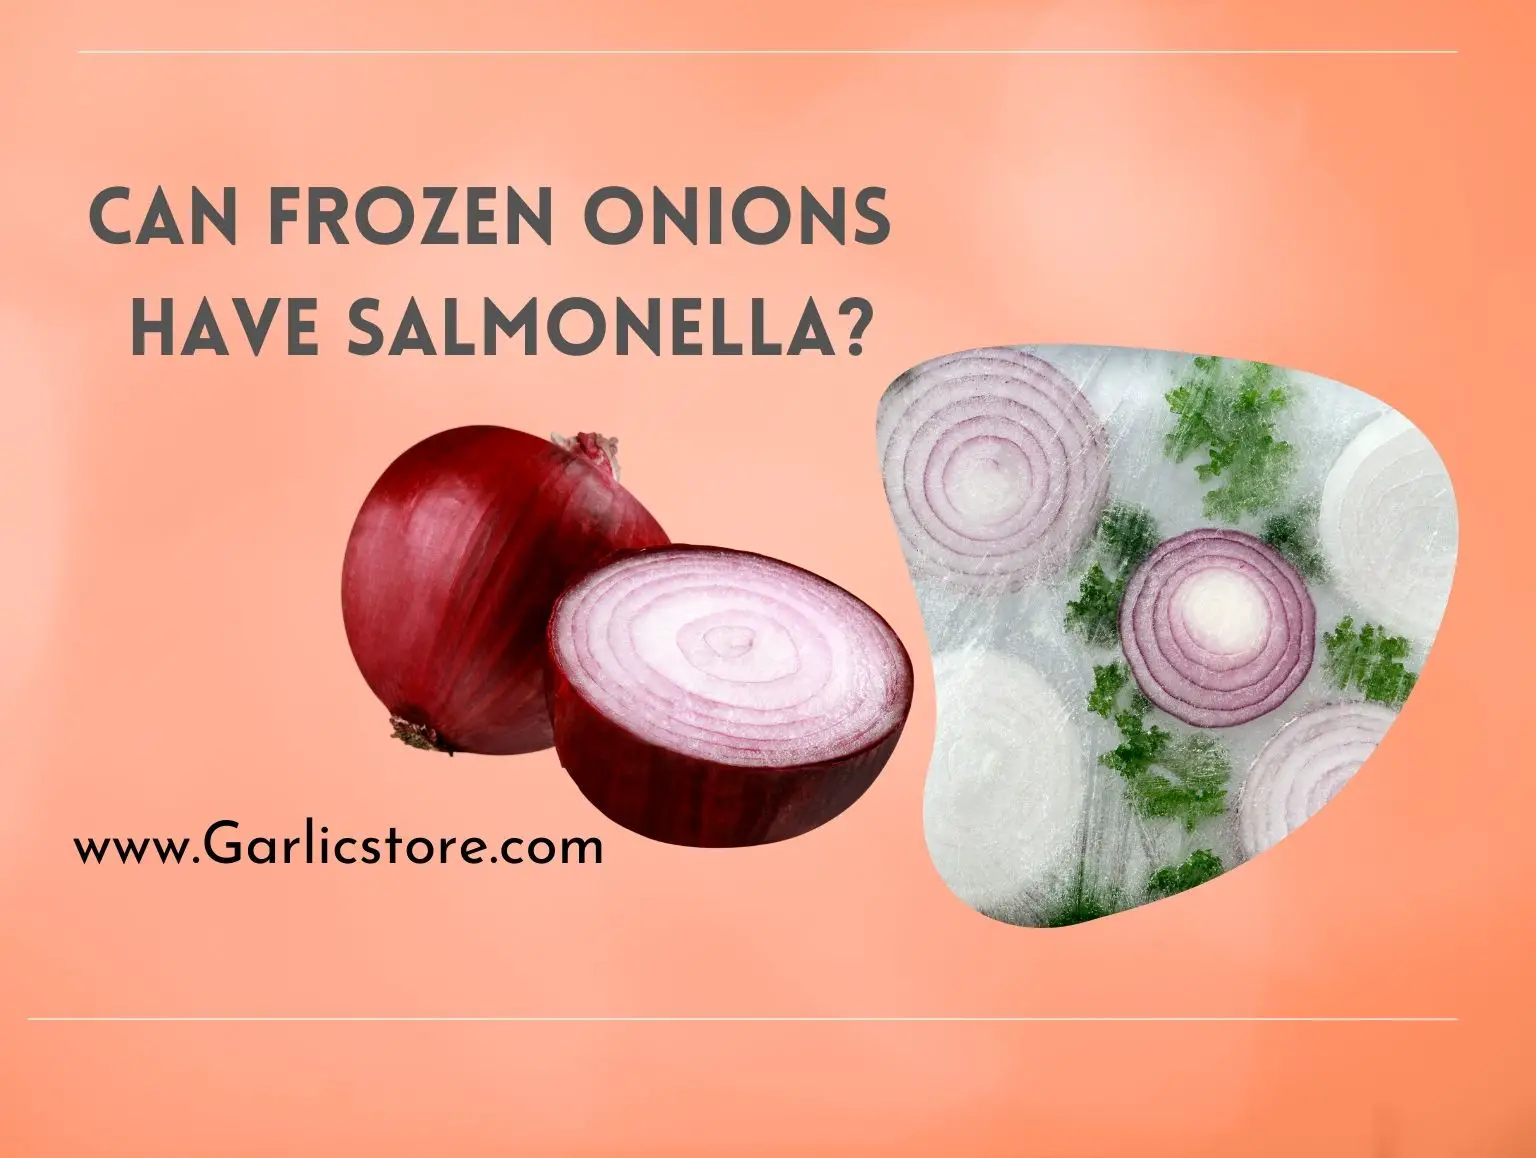 can frozen onions have salmonella